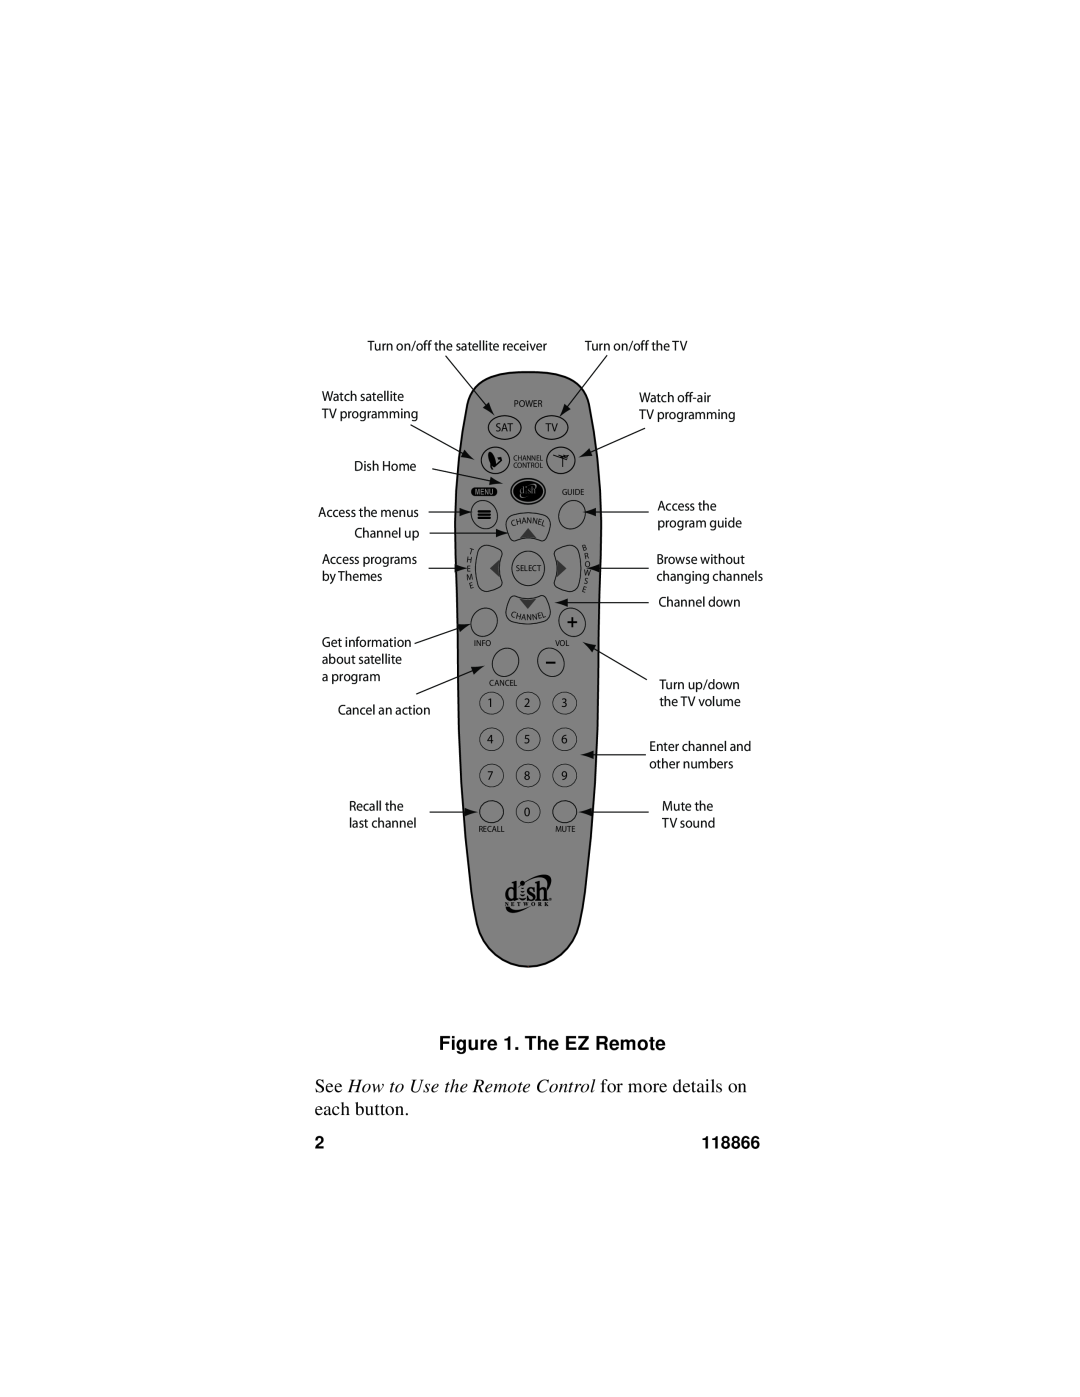 Dish Network manual The EZ Remote, See How to Use the Remote Control for more details on, 118866 